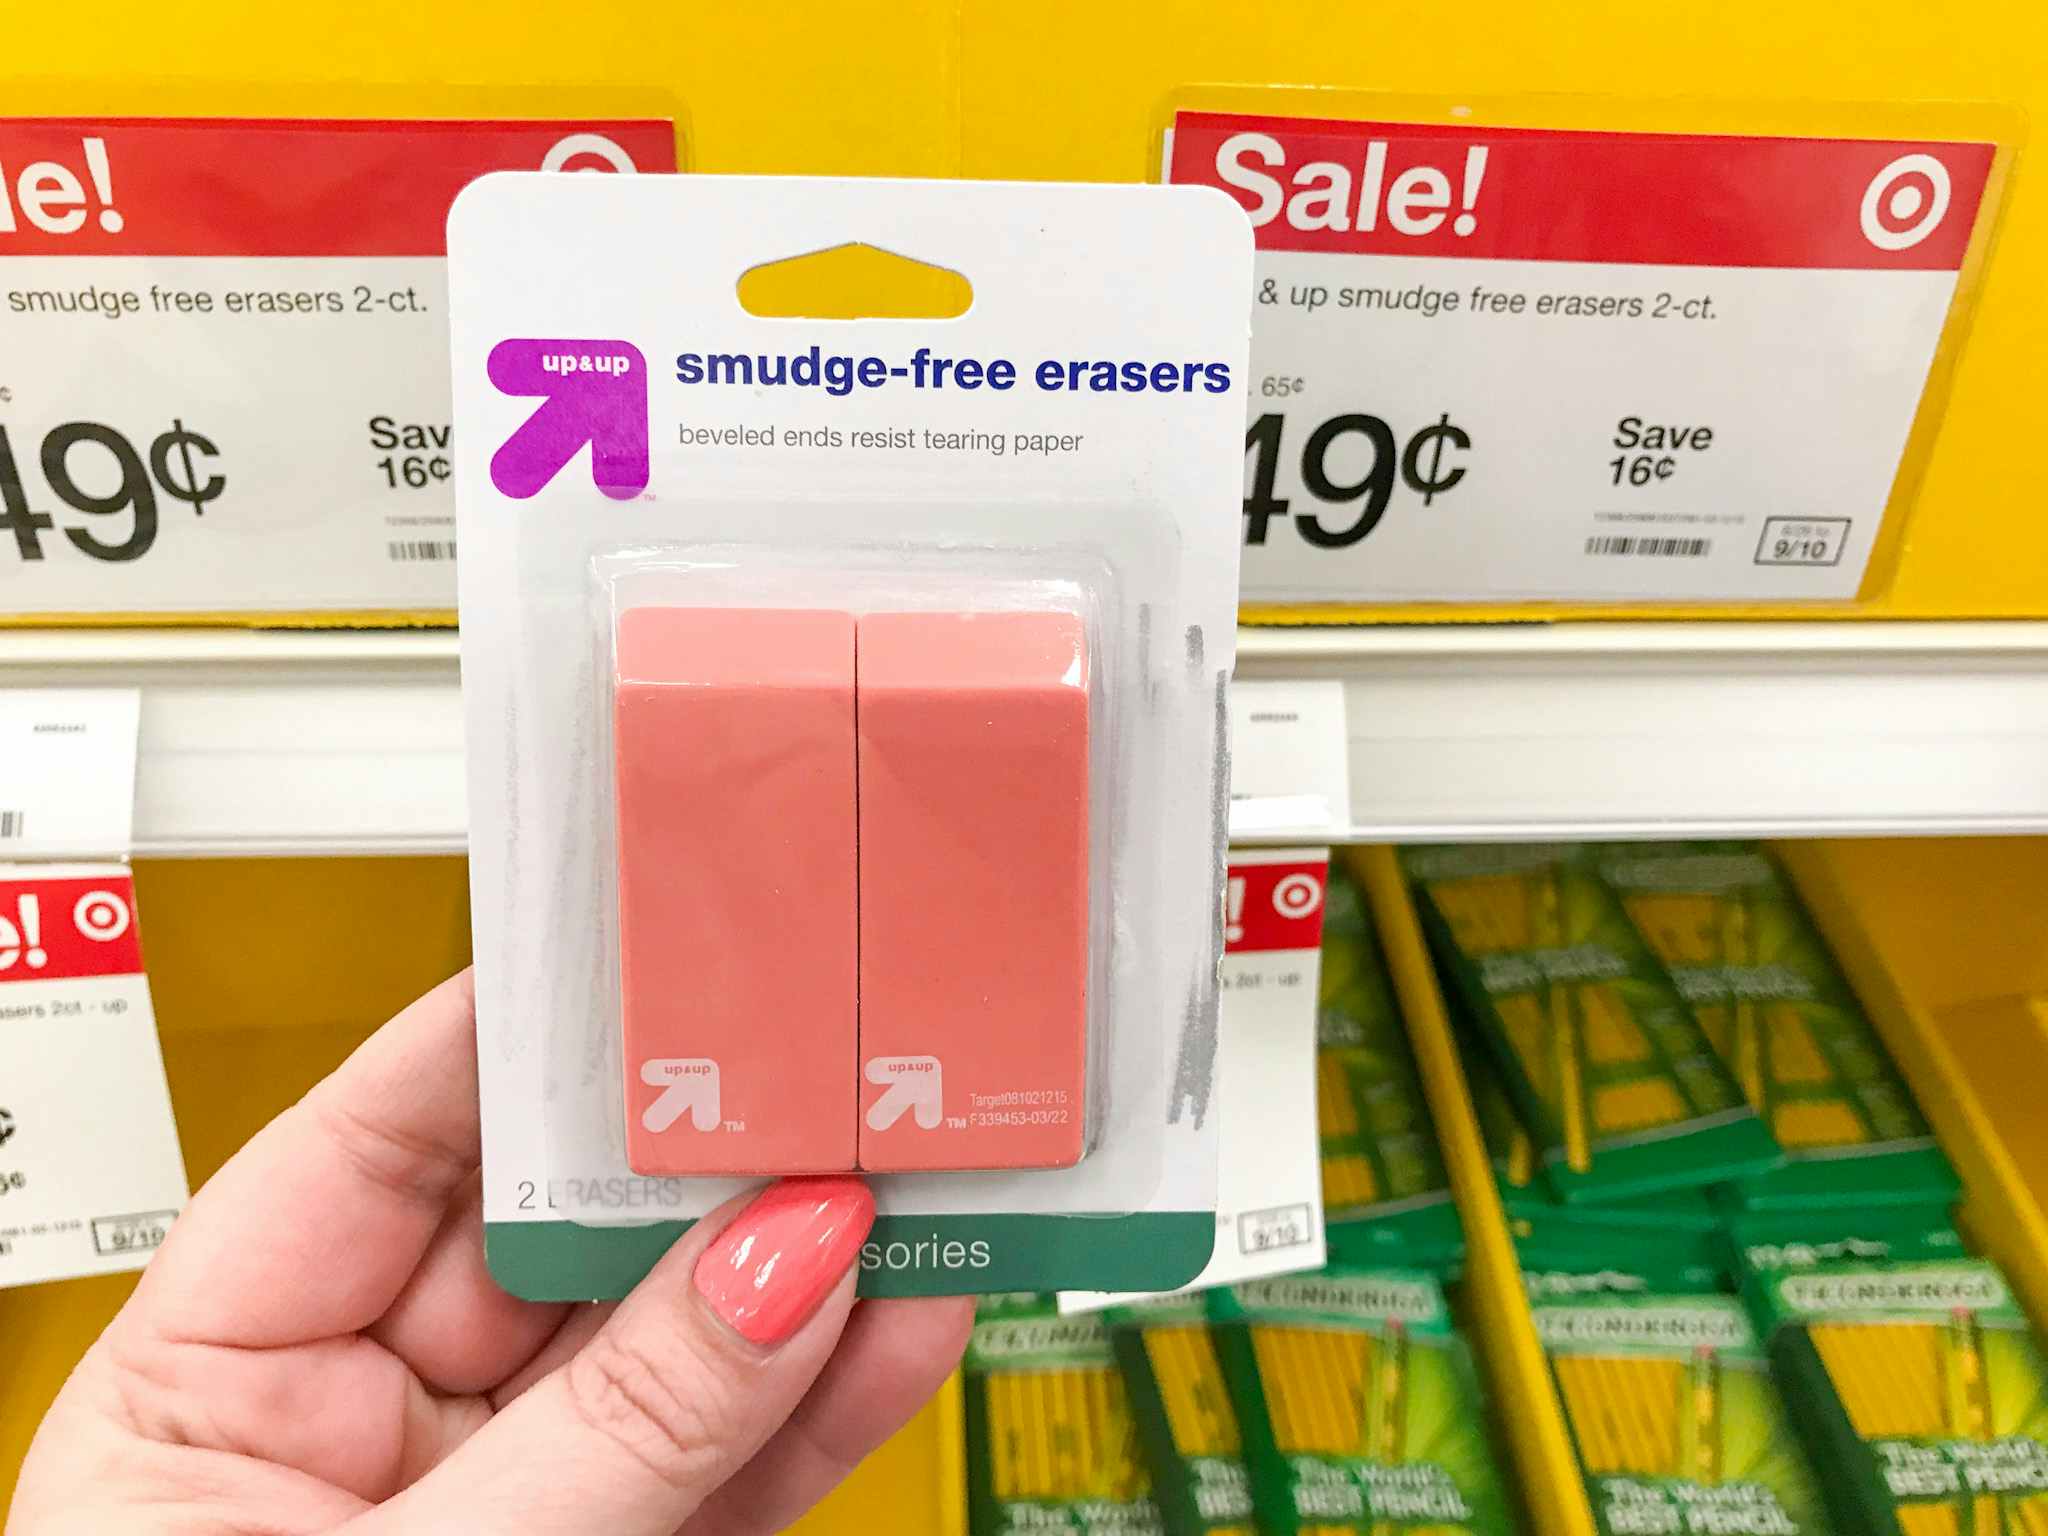 a woman's hand holding up a two-pack of up & up smudge-free erasers in front of a $0.49 sale sign